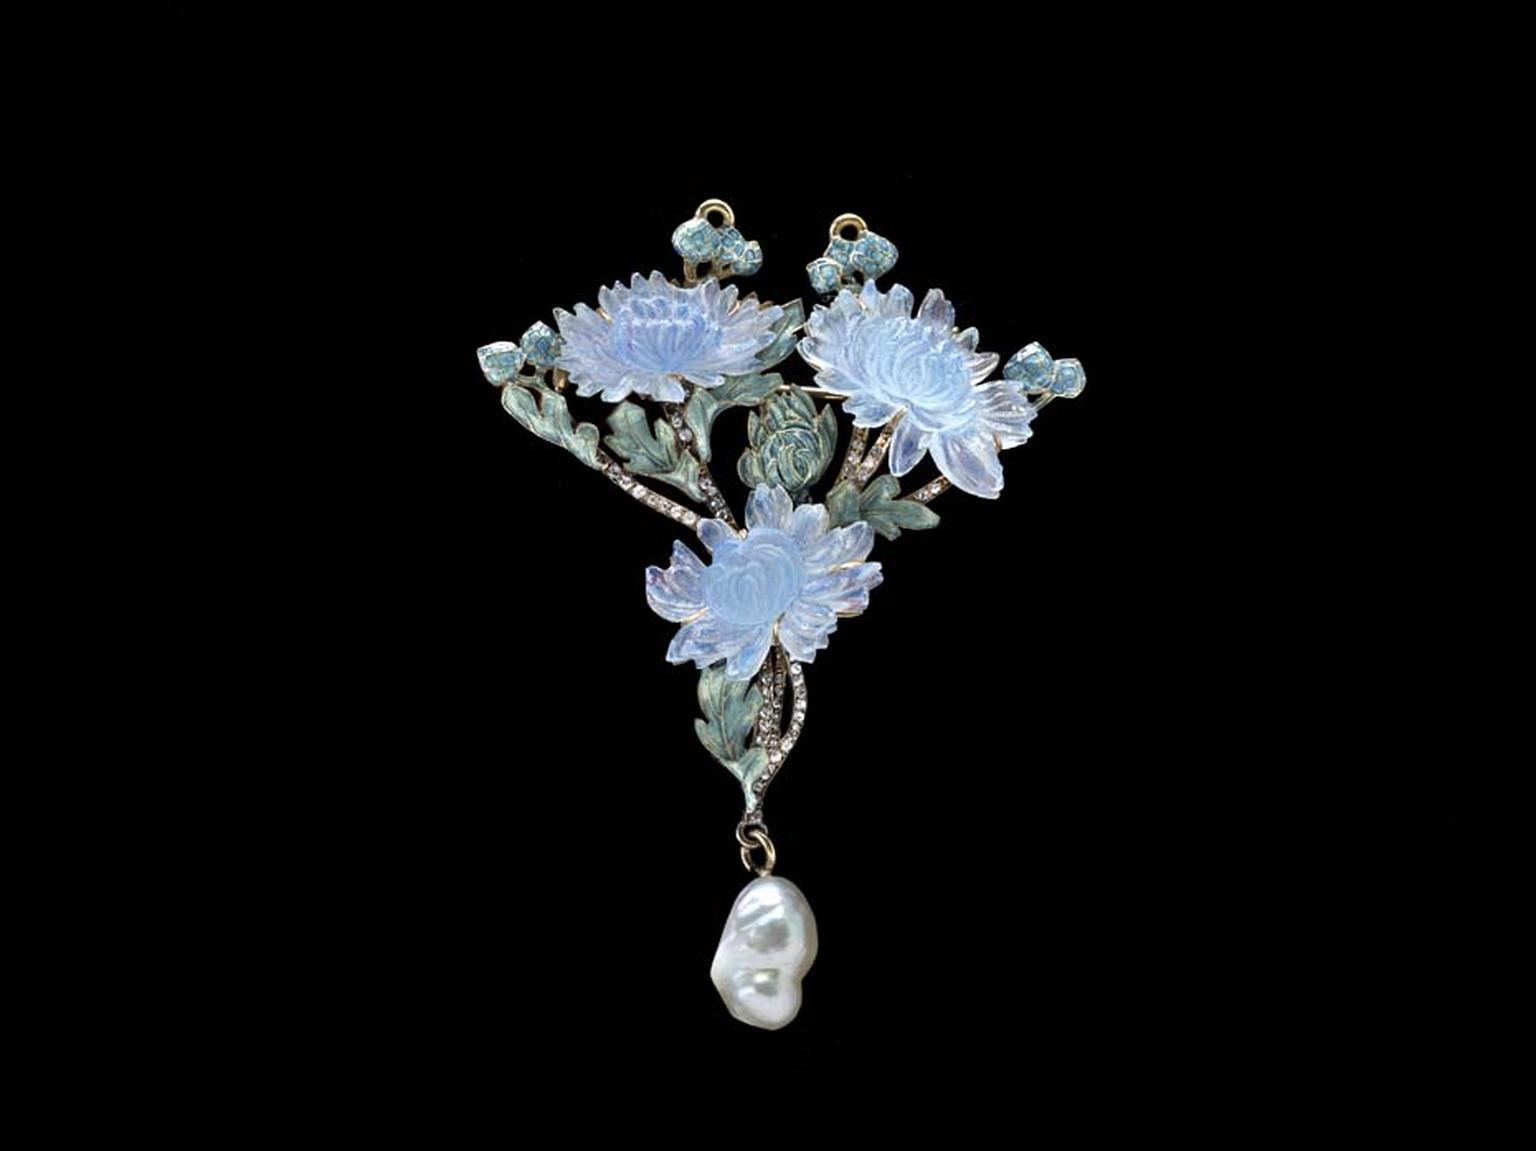 René Lalique (French, 1860-1945), Chrysanthemum Pendant/Brooch, c. 1900. Collection of Richard H. Driehaus. © 2014 Artists Rights Society (ARS), New York / ADAGP, Paris. Photograph by John A. Faier, 2014, © The Richard H. Driehaus Museum. On display at th